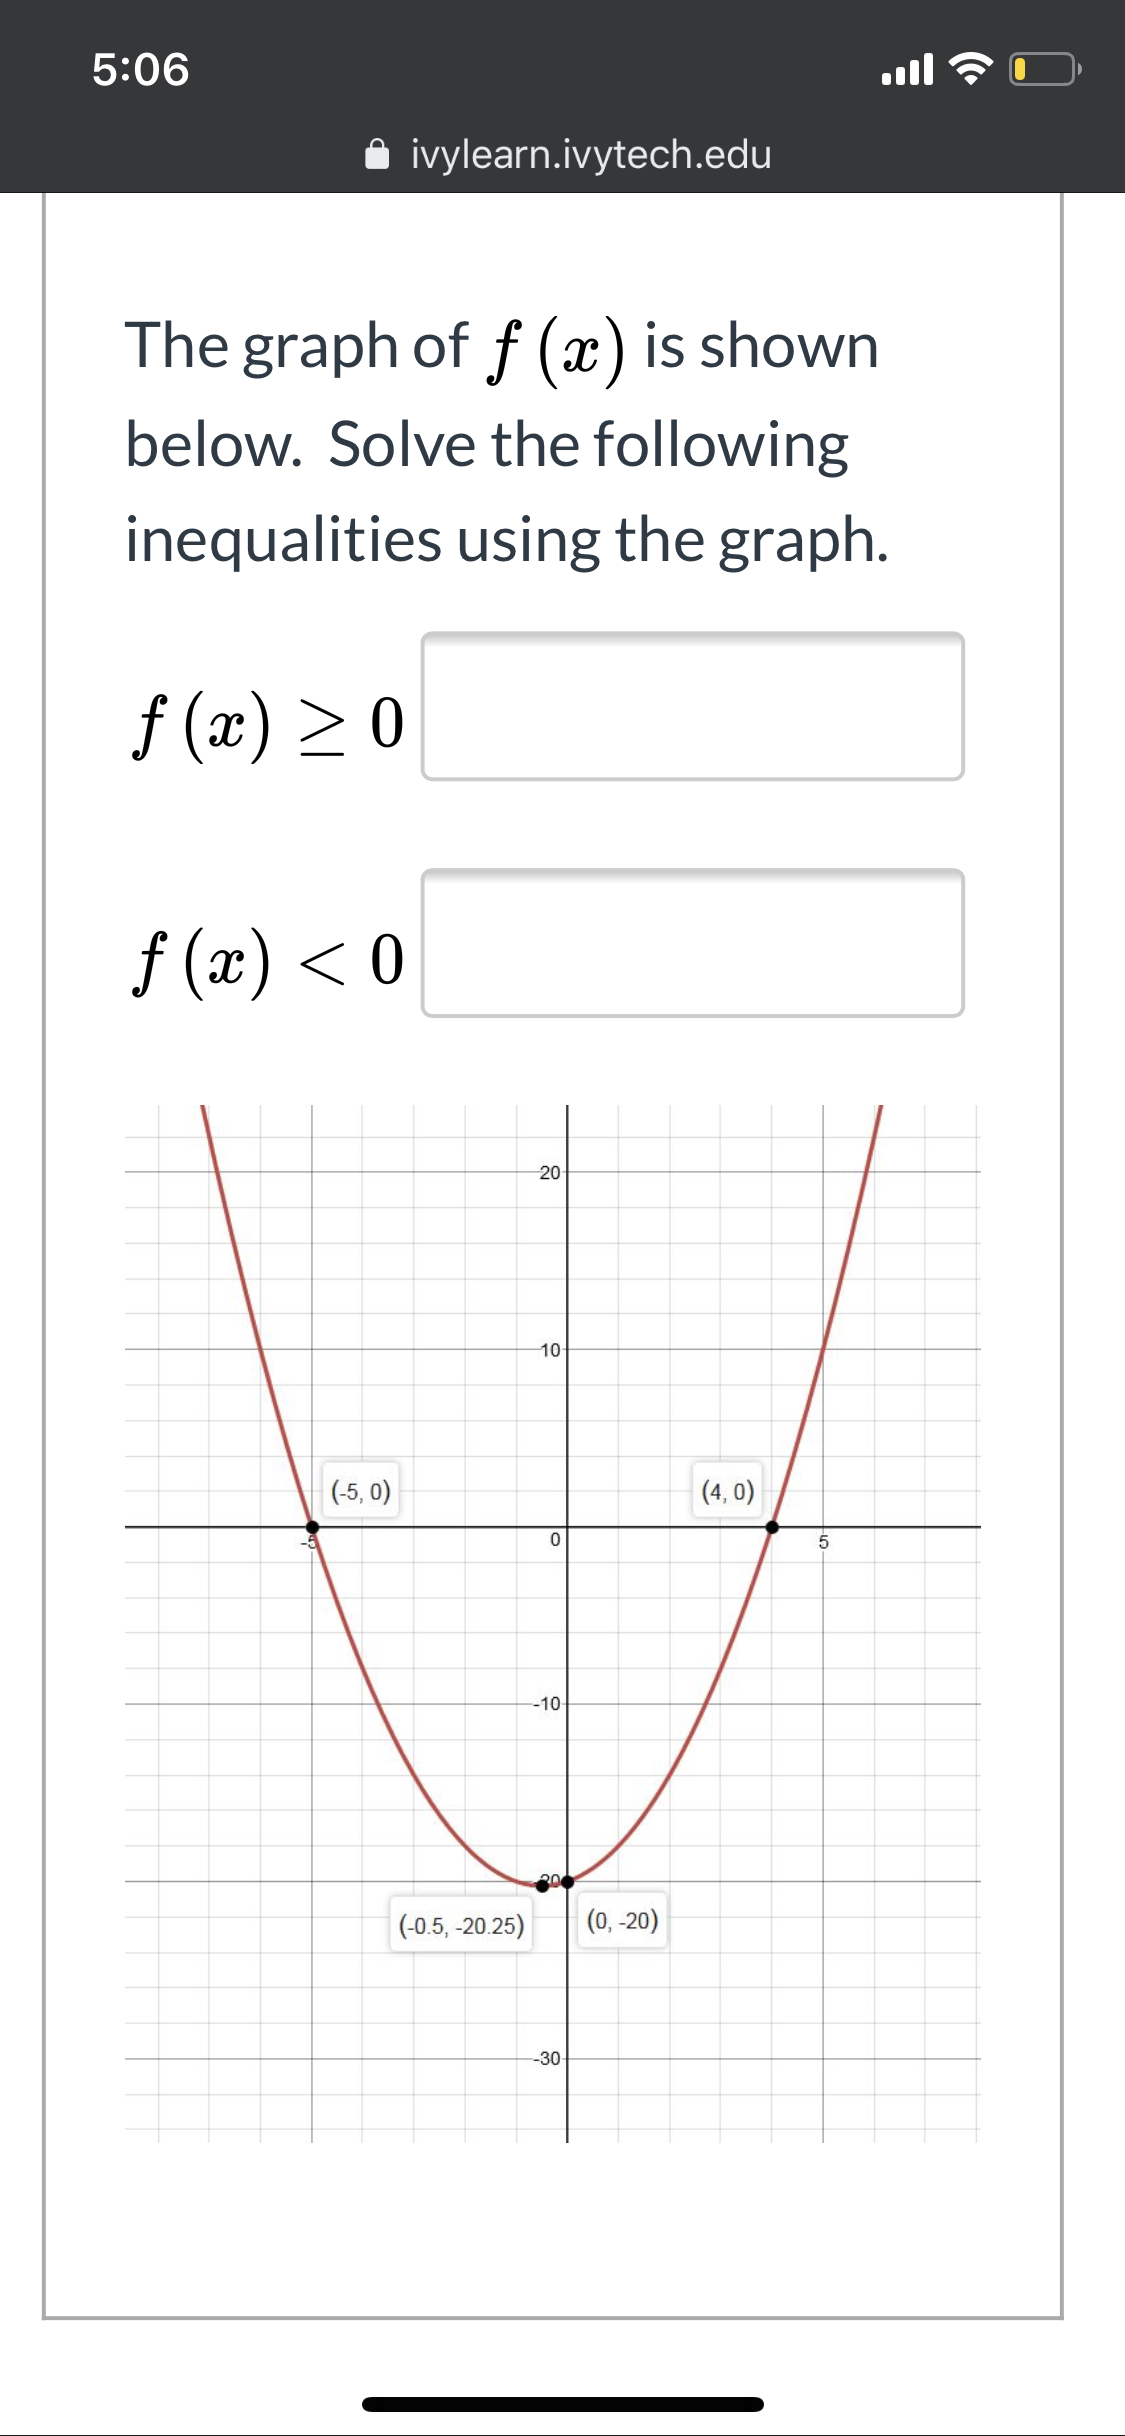 5:06
ull
O ivylearn.ivytech.edu
The graph of f (x) is shown
below. Solve the following
inequalities using the graph.
f (x) > 0
f (x) < 0
20
(-5, 0)
(4, 0)
-10
(-0.5, -20.25)
|(0, -20)
-30
10
